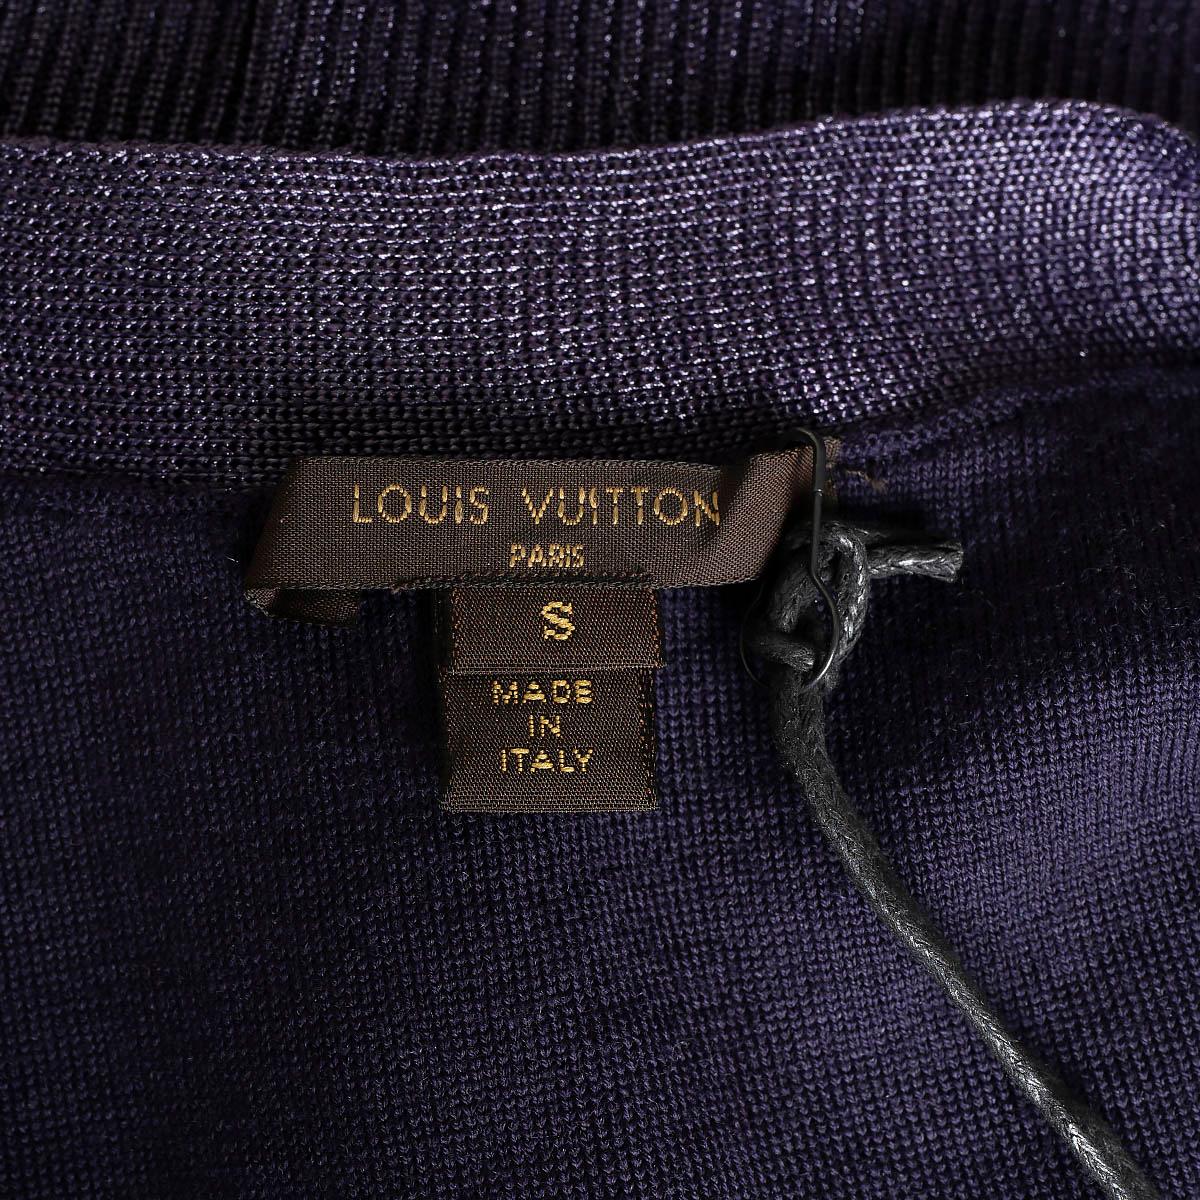 LOUIS VUITTON metallic purple polyester Button-Front Cardigan Sweater S For Sale 3